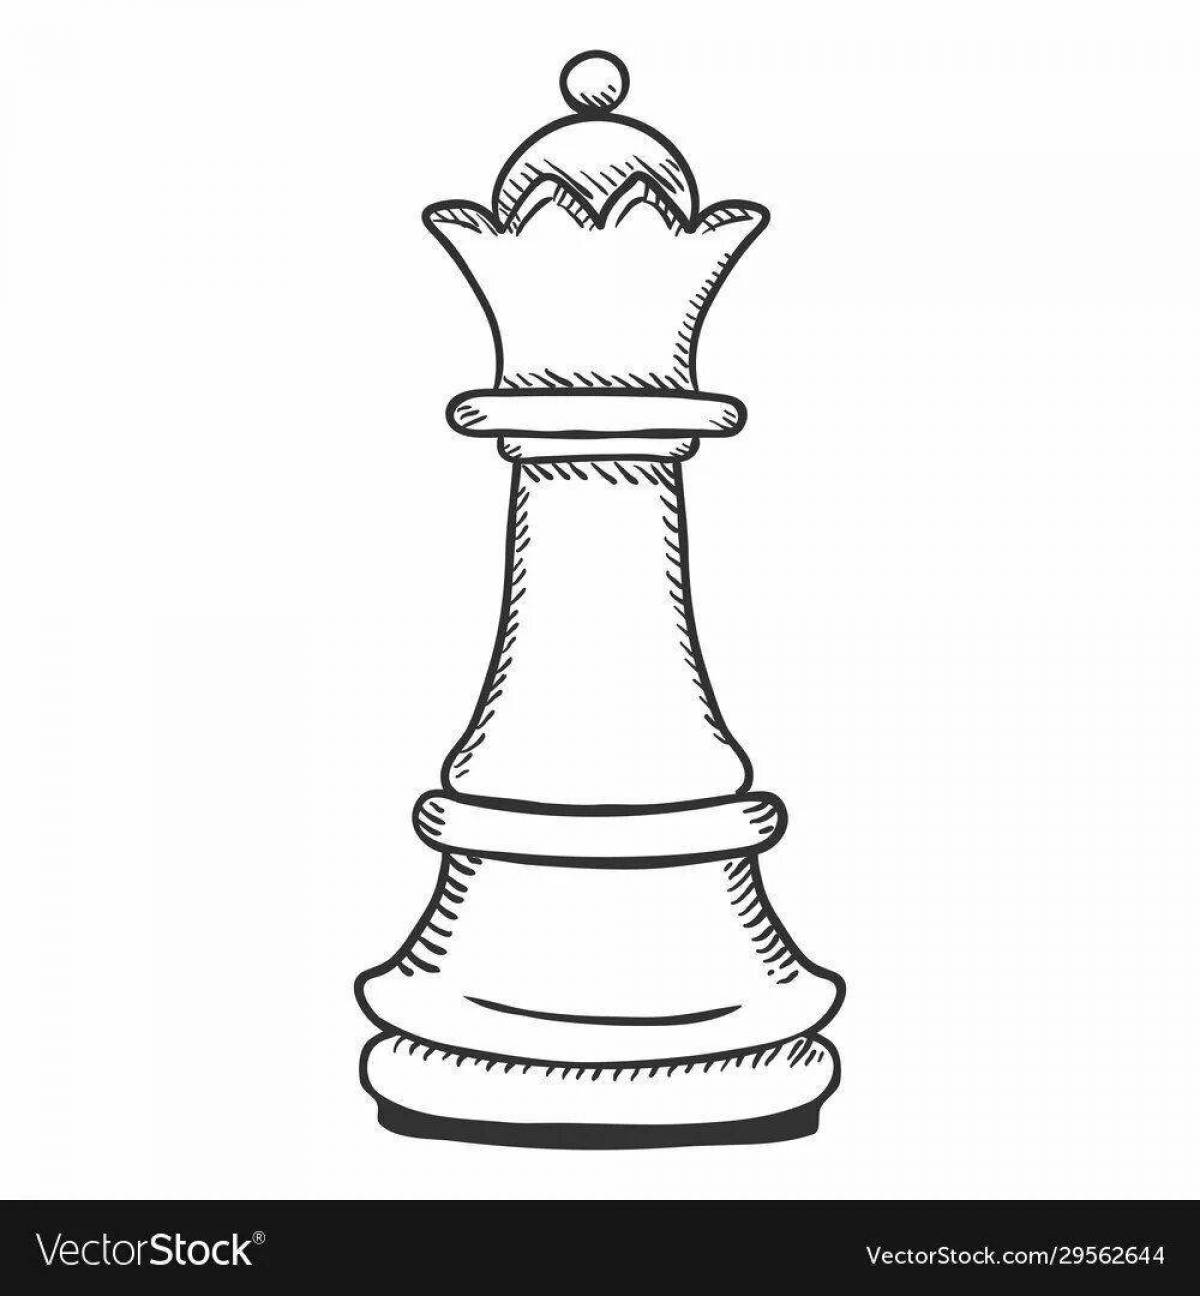 Coloring pages of fascinating chess pieces